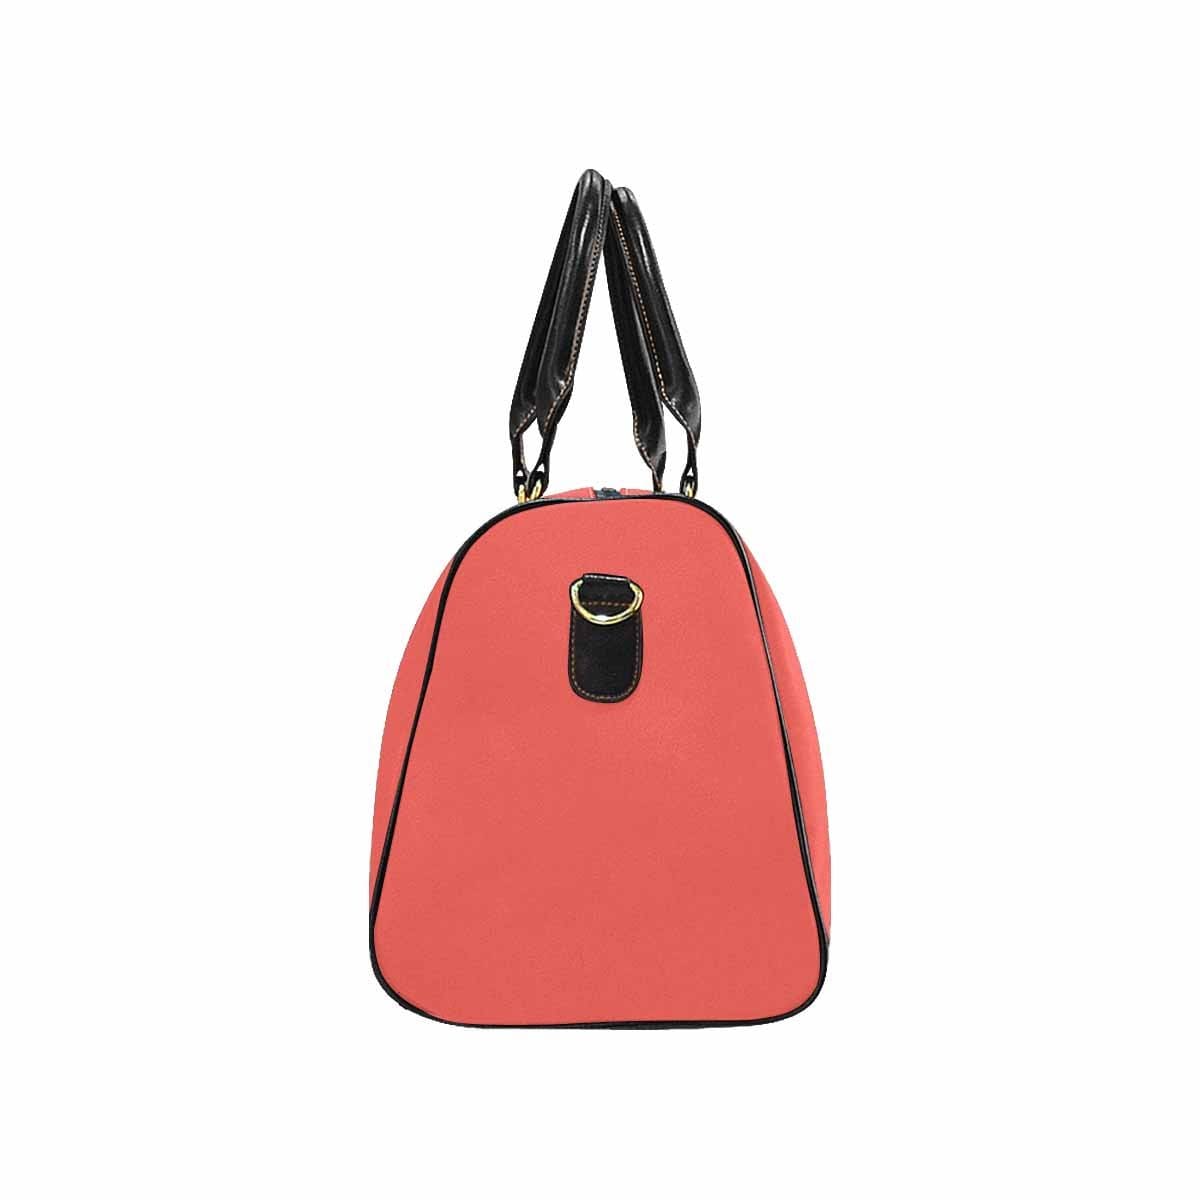 Pastel Red Travel Bag Carry On Luggage Adjustable Strap Black - Bags | Travel